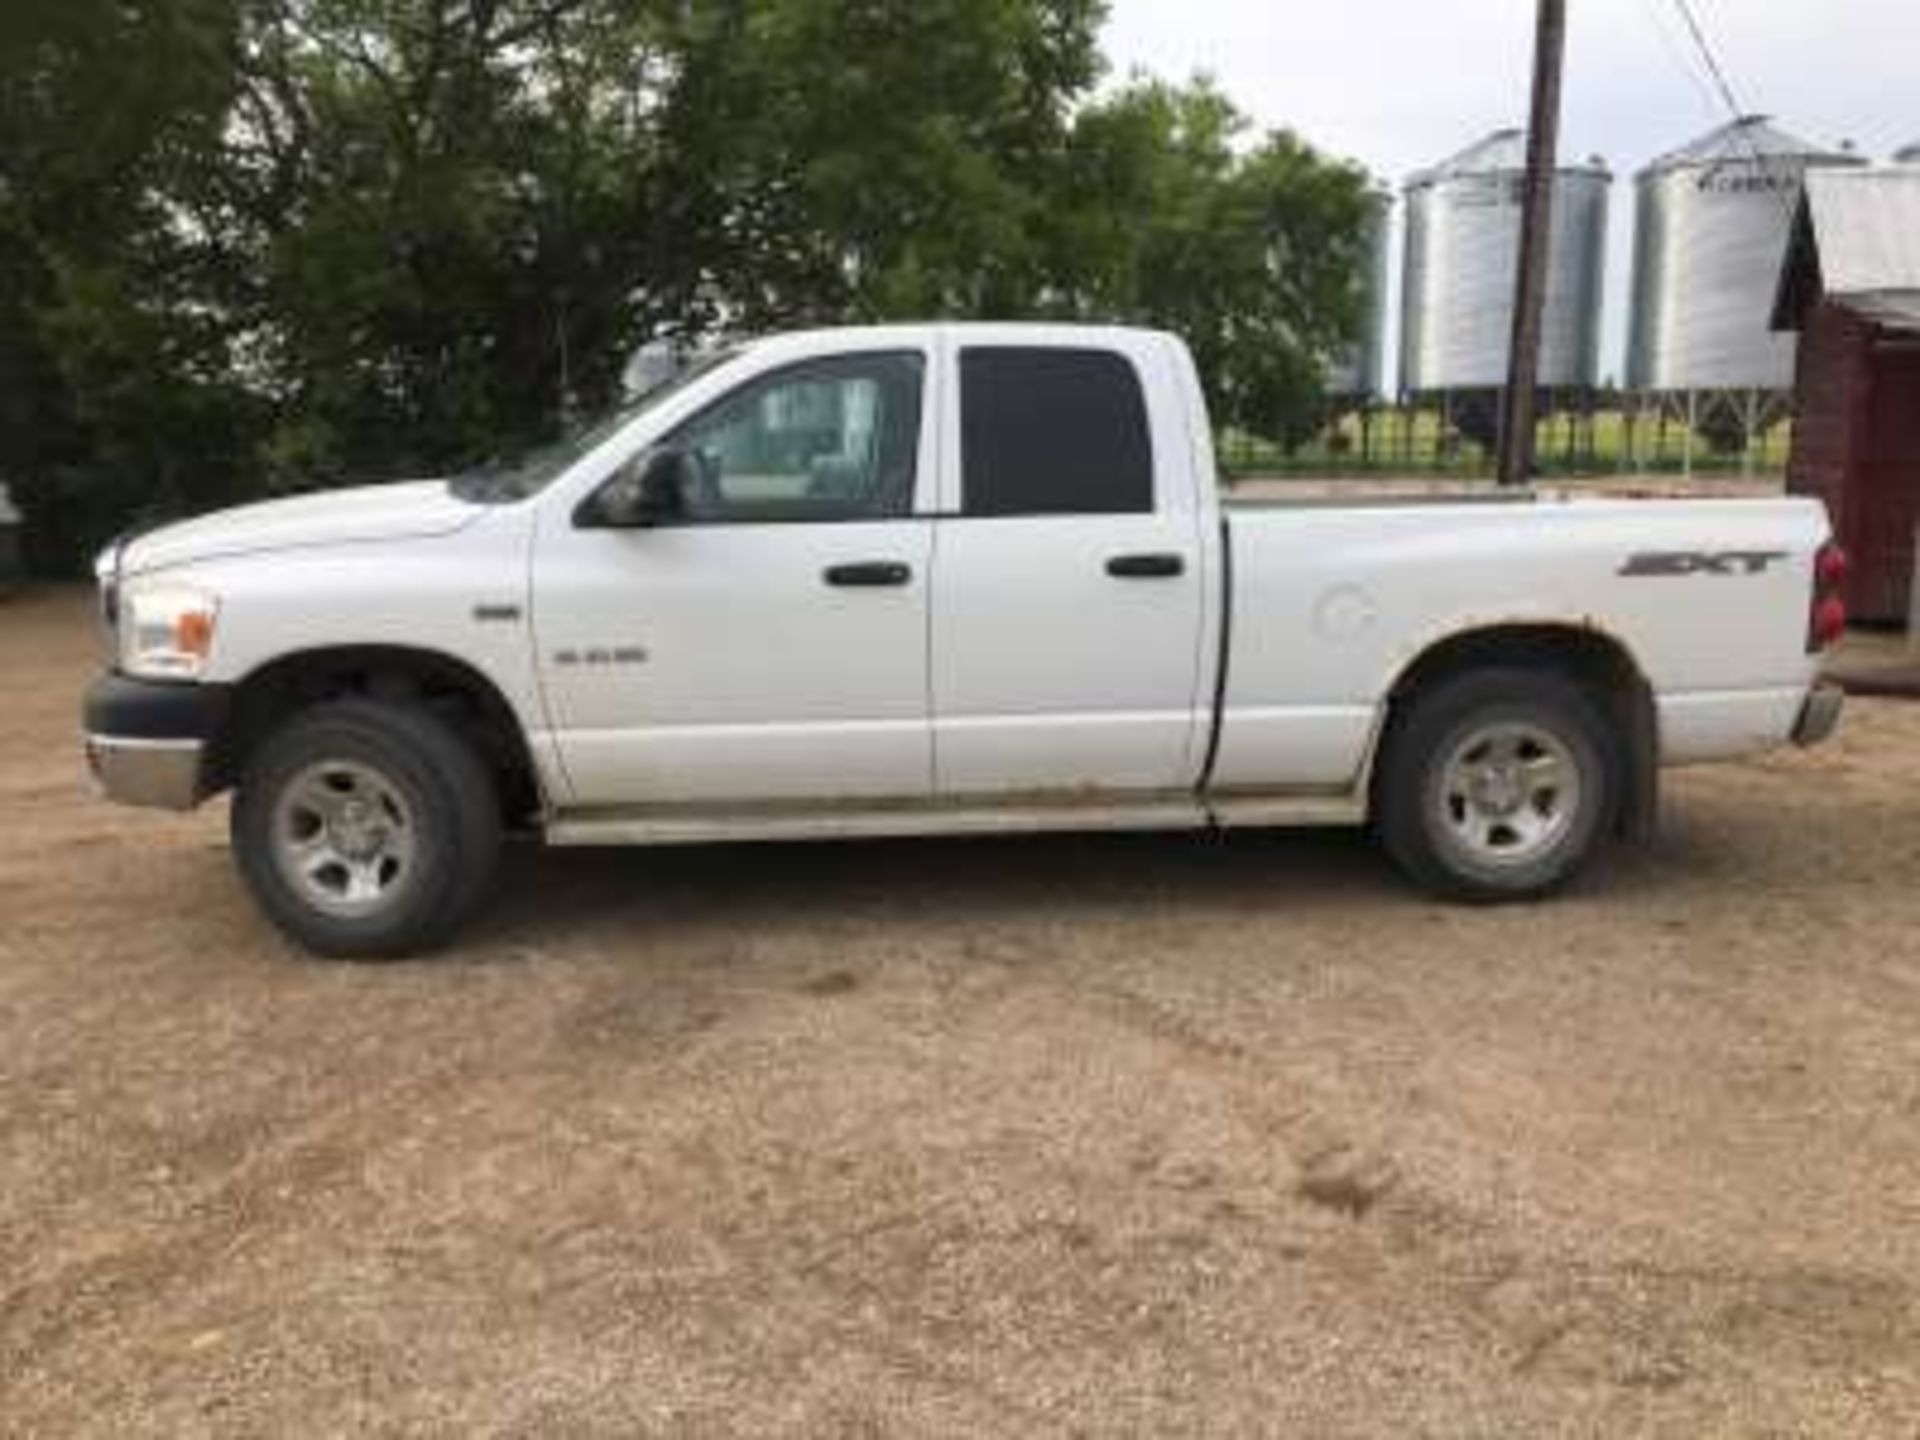 2006 Dodge Ram 1500 Quad Cab truck (White), 4x4, auto, p/t/c/ac, and 266,000kms (Previously - Image 3 of 4